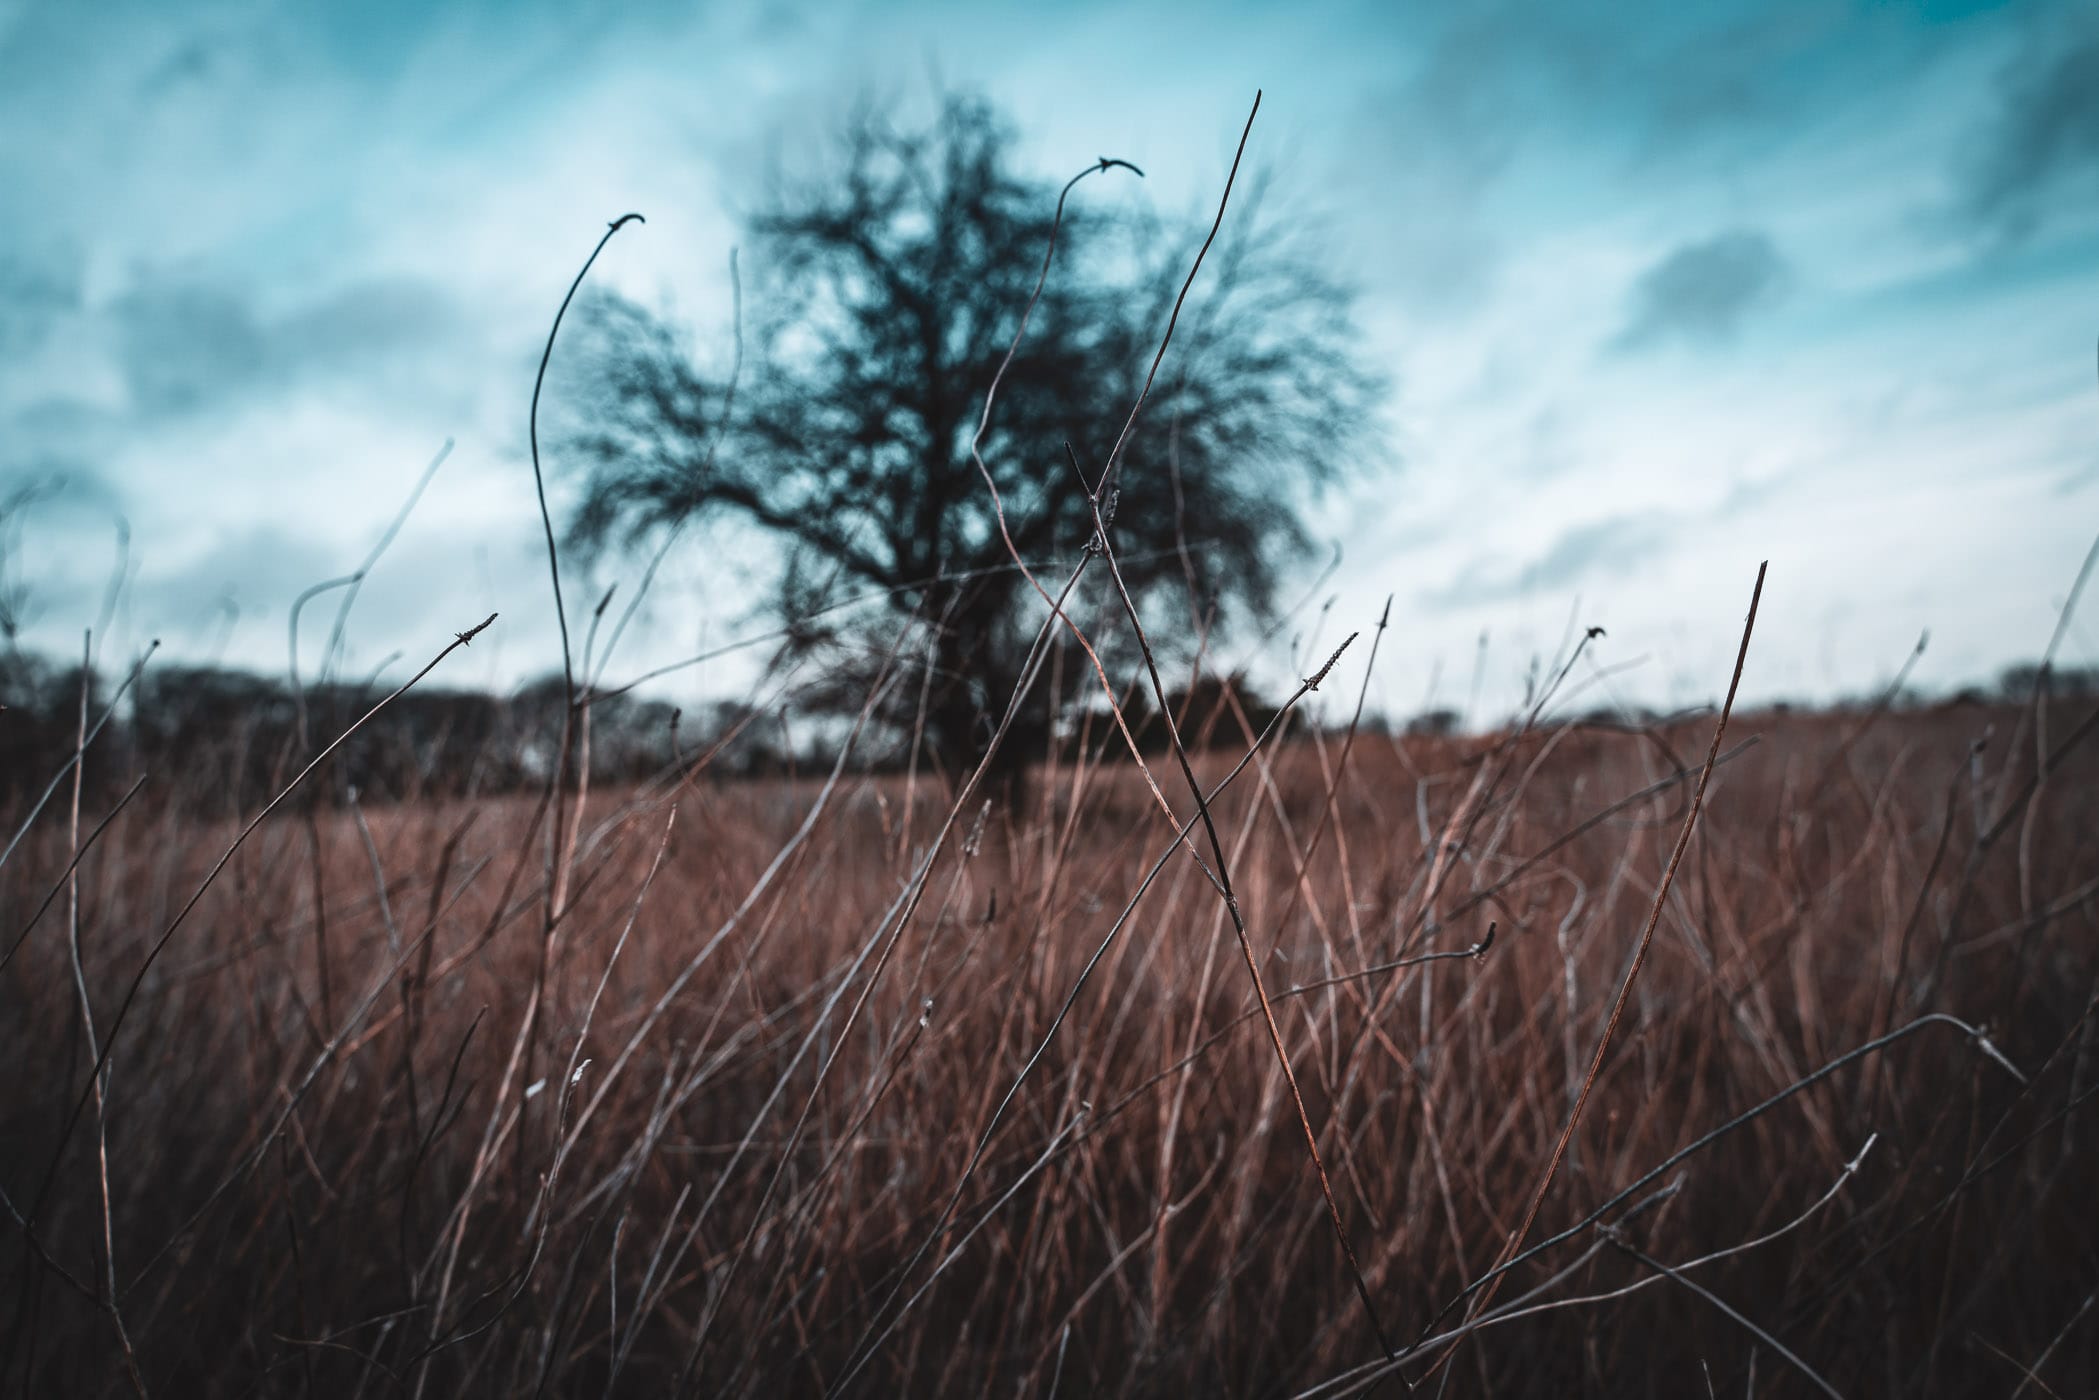 Tall grass withers in the cold at McKinney, Texas' Erwin Park.